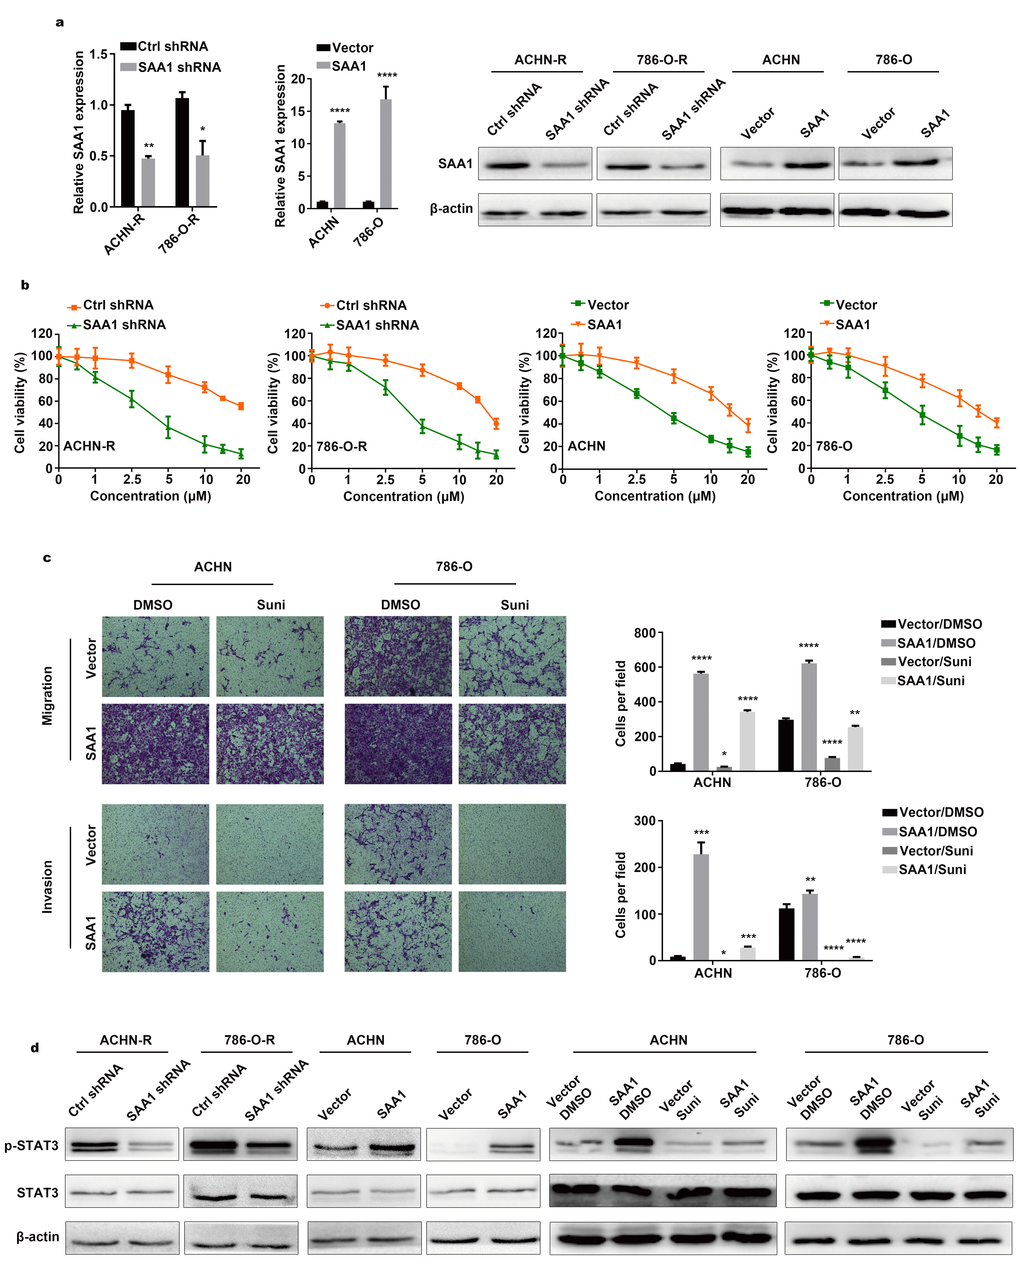 SAA1 mediates sunitinib resistance of RCC. (A) SAA1 expression was detected by RT–qPCR and western blotting after knockdown and overexpression. (B) Cell viability assays in sunitinib concentration gradients were conducted after SAA1 knockdown and overexpression. (C) Transwell assays were conducted after sunitinib treatment and SAA1 overexpression. (D) Western blotting analysis of p-STAT3 and STAT3 after silencing SAA1 in resistant cells, upregulating SAA1 in parental cells and overexpressing SAA1 combined with sunitinib treatment in parental cells. β-actin served as the loading control. Each experiment was performed at least three times and data was represented as mean ± SEM. *P